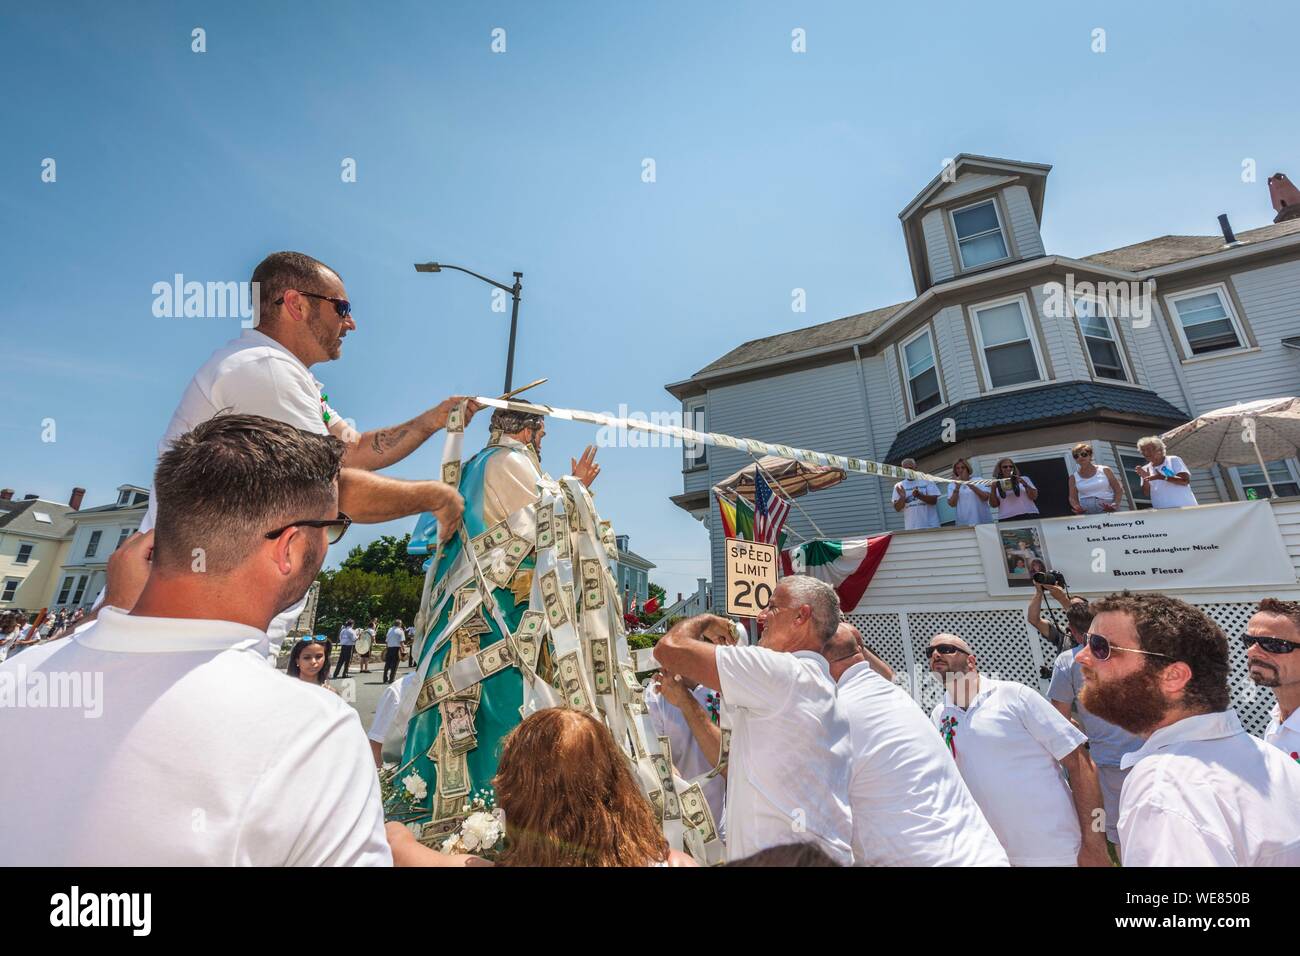 United States, New England, Massachusetts, Cape Ann, Gloucester, Saint Peters Fiesta, Traditional Italian Fishing Community Festival, men attaching ropes of money donations to the statue of St. Peter Stock Photo